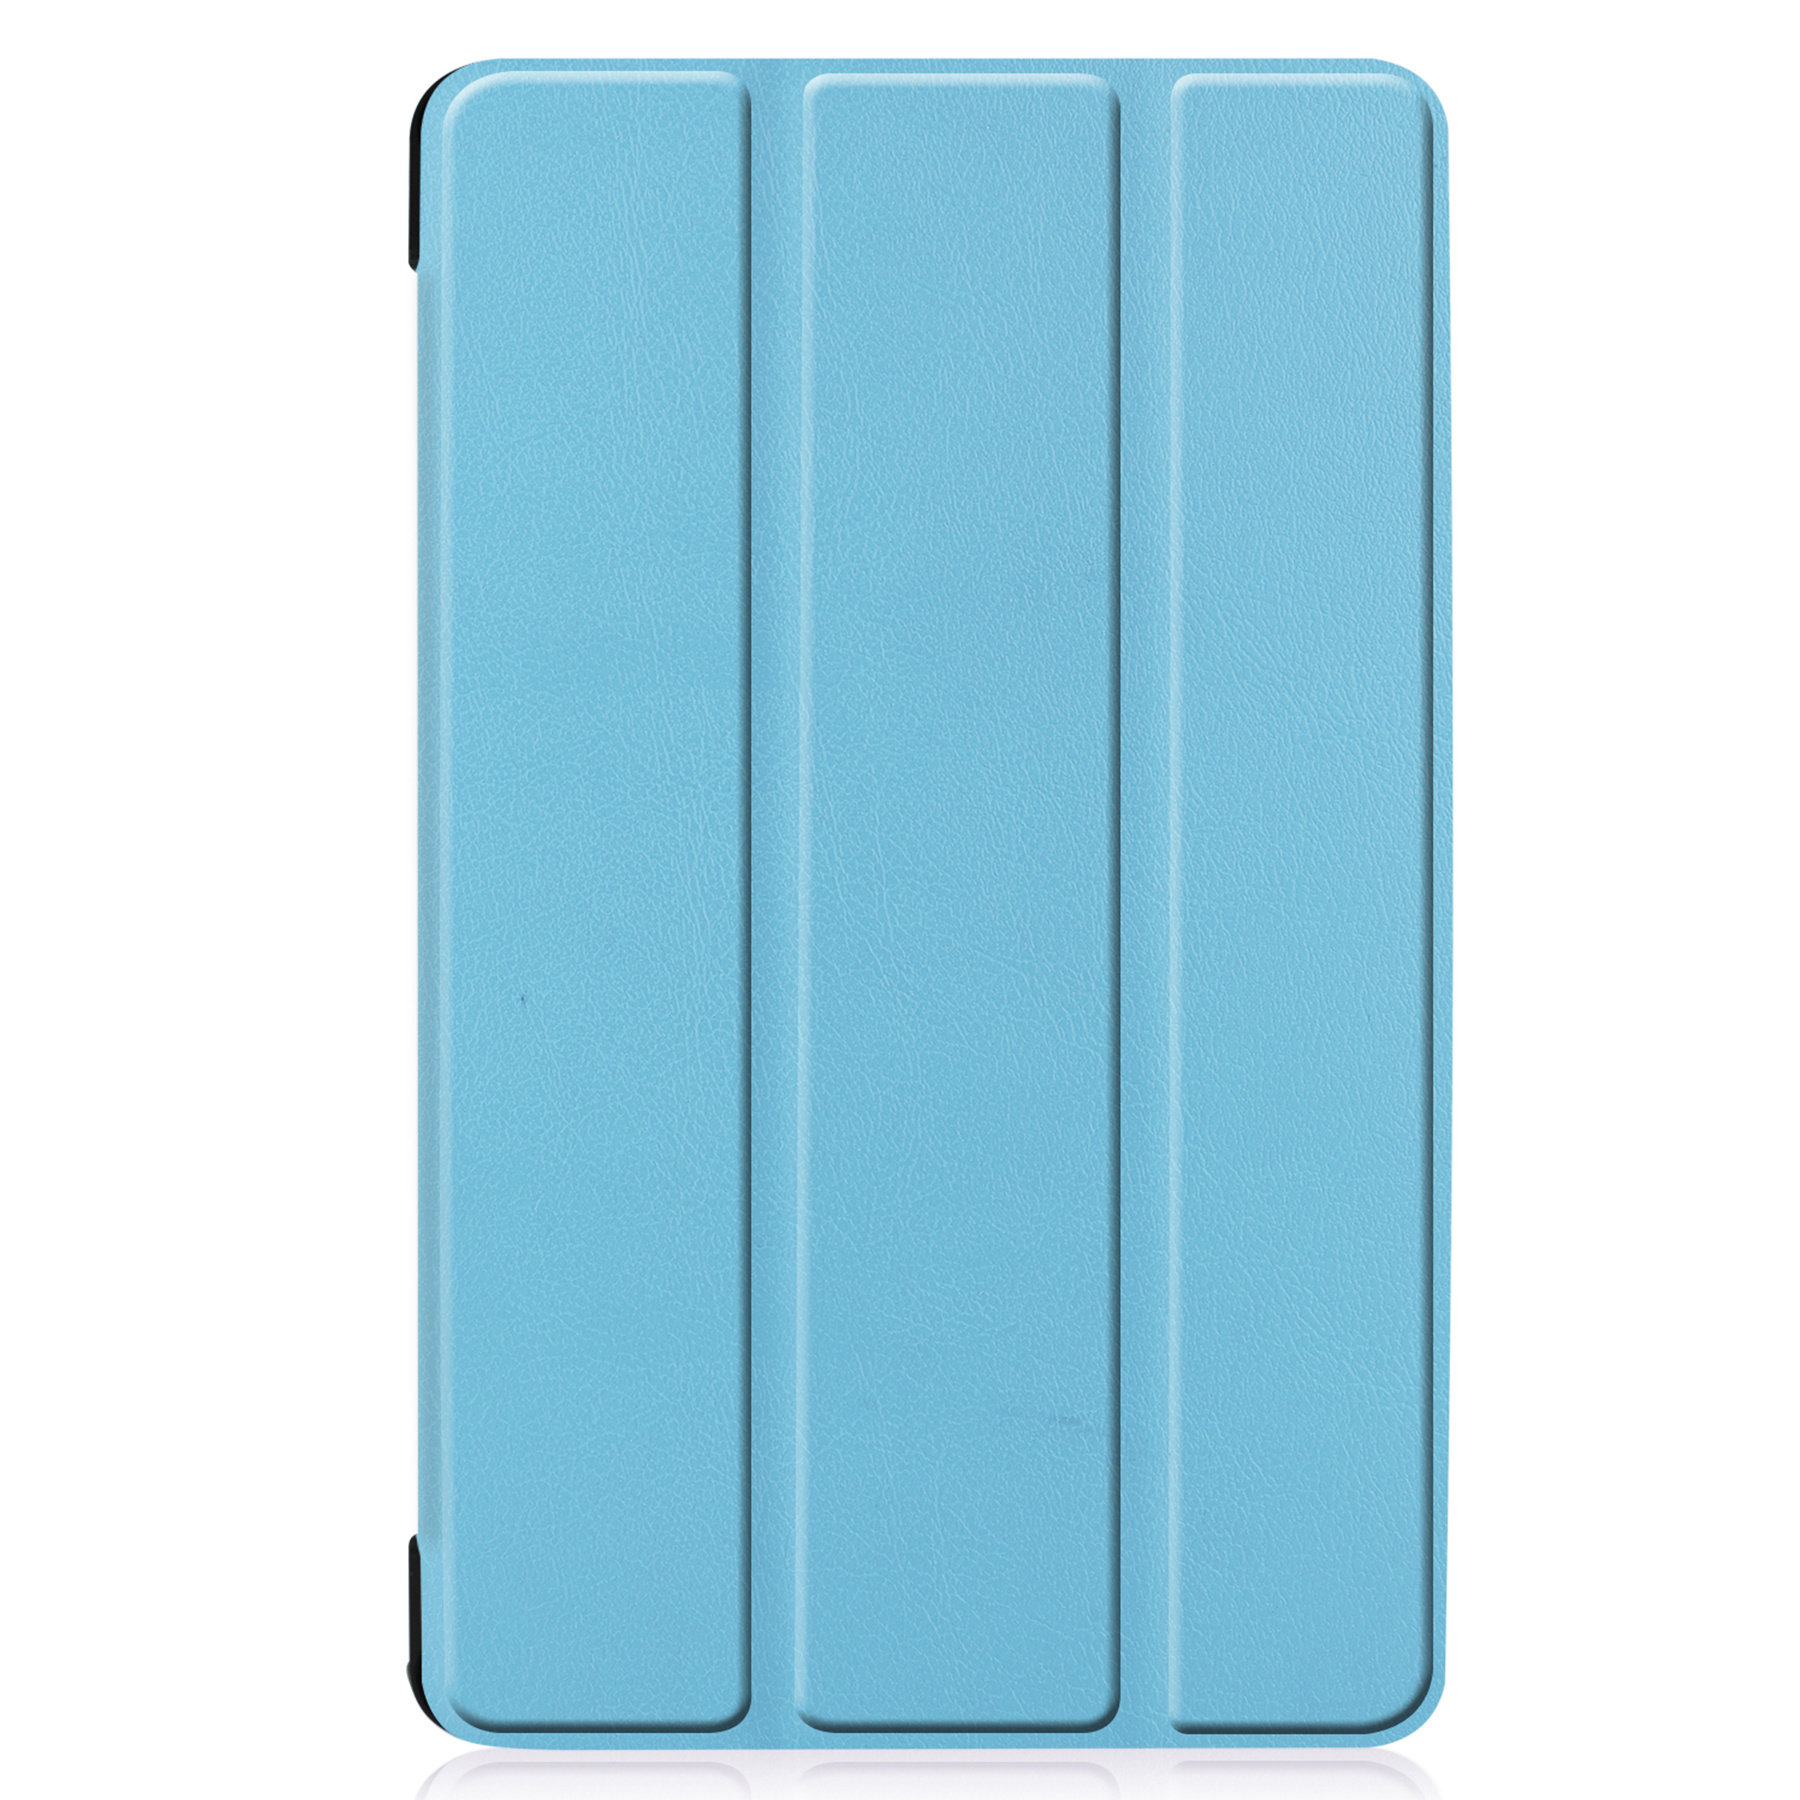 BASEY. Samsung Galaxy Tab A 8.0 2019 Hoes Book Case Luxe Hoesje Met Screenprotector - Samsung Galaxy Tab A 8.0 (2019) Hoesje Book Case Hoes - Lichtblauw